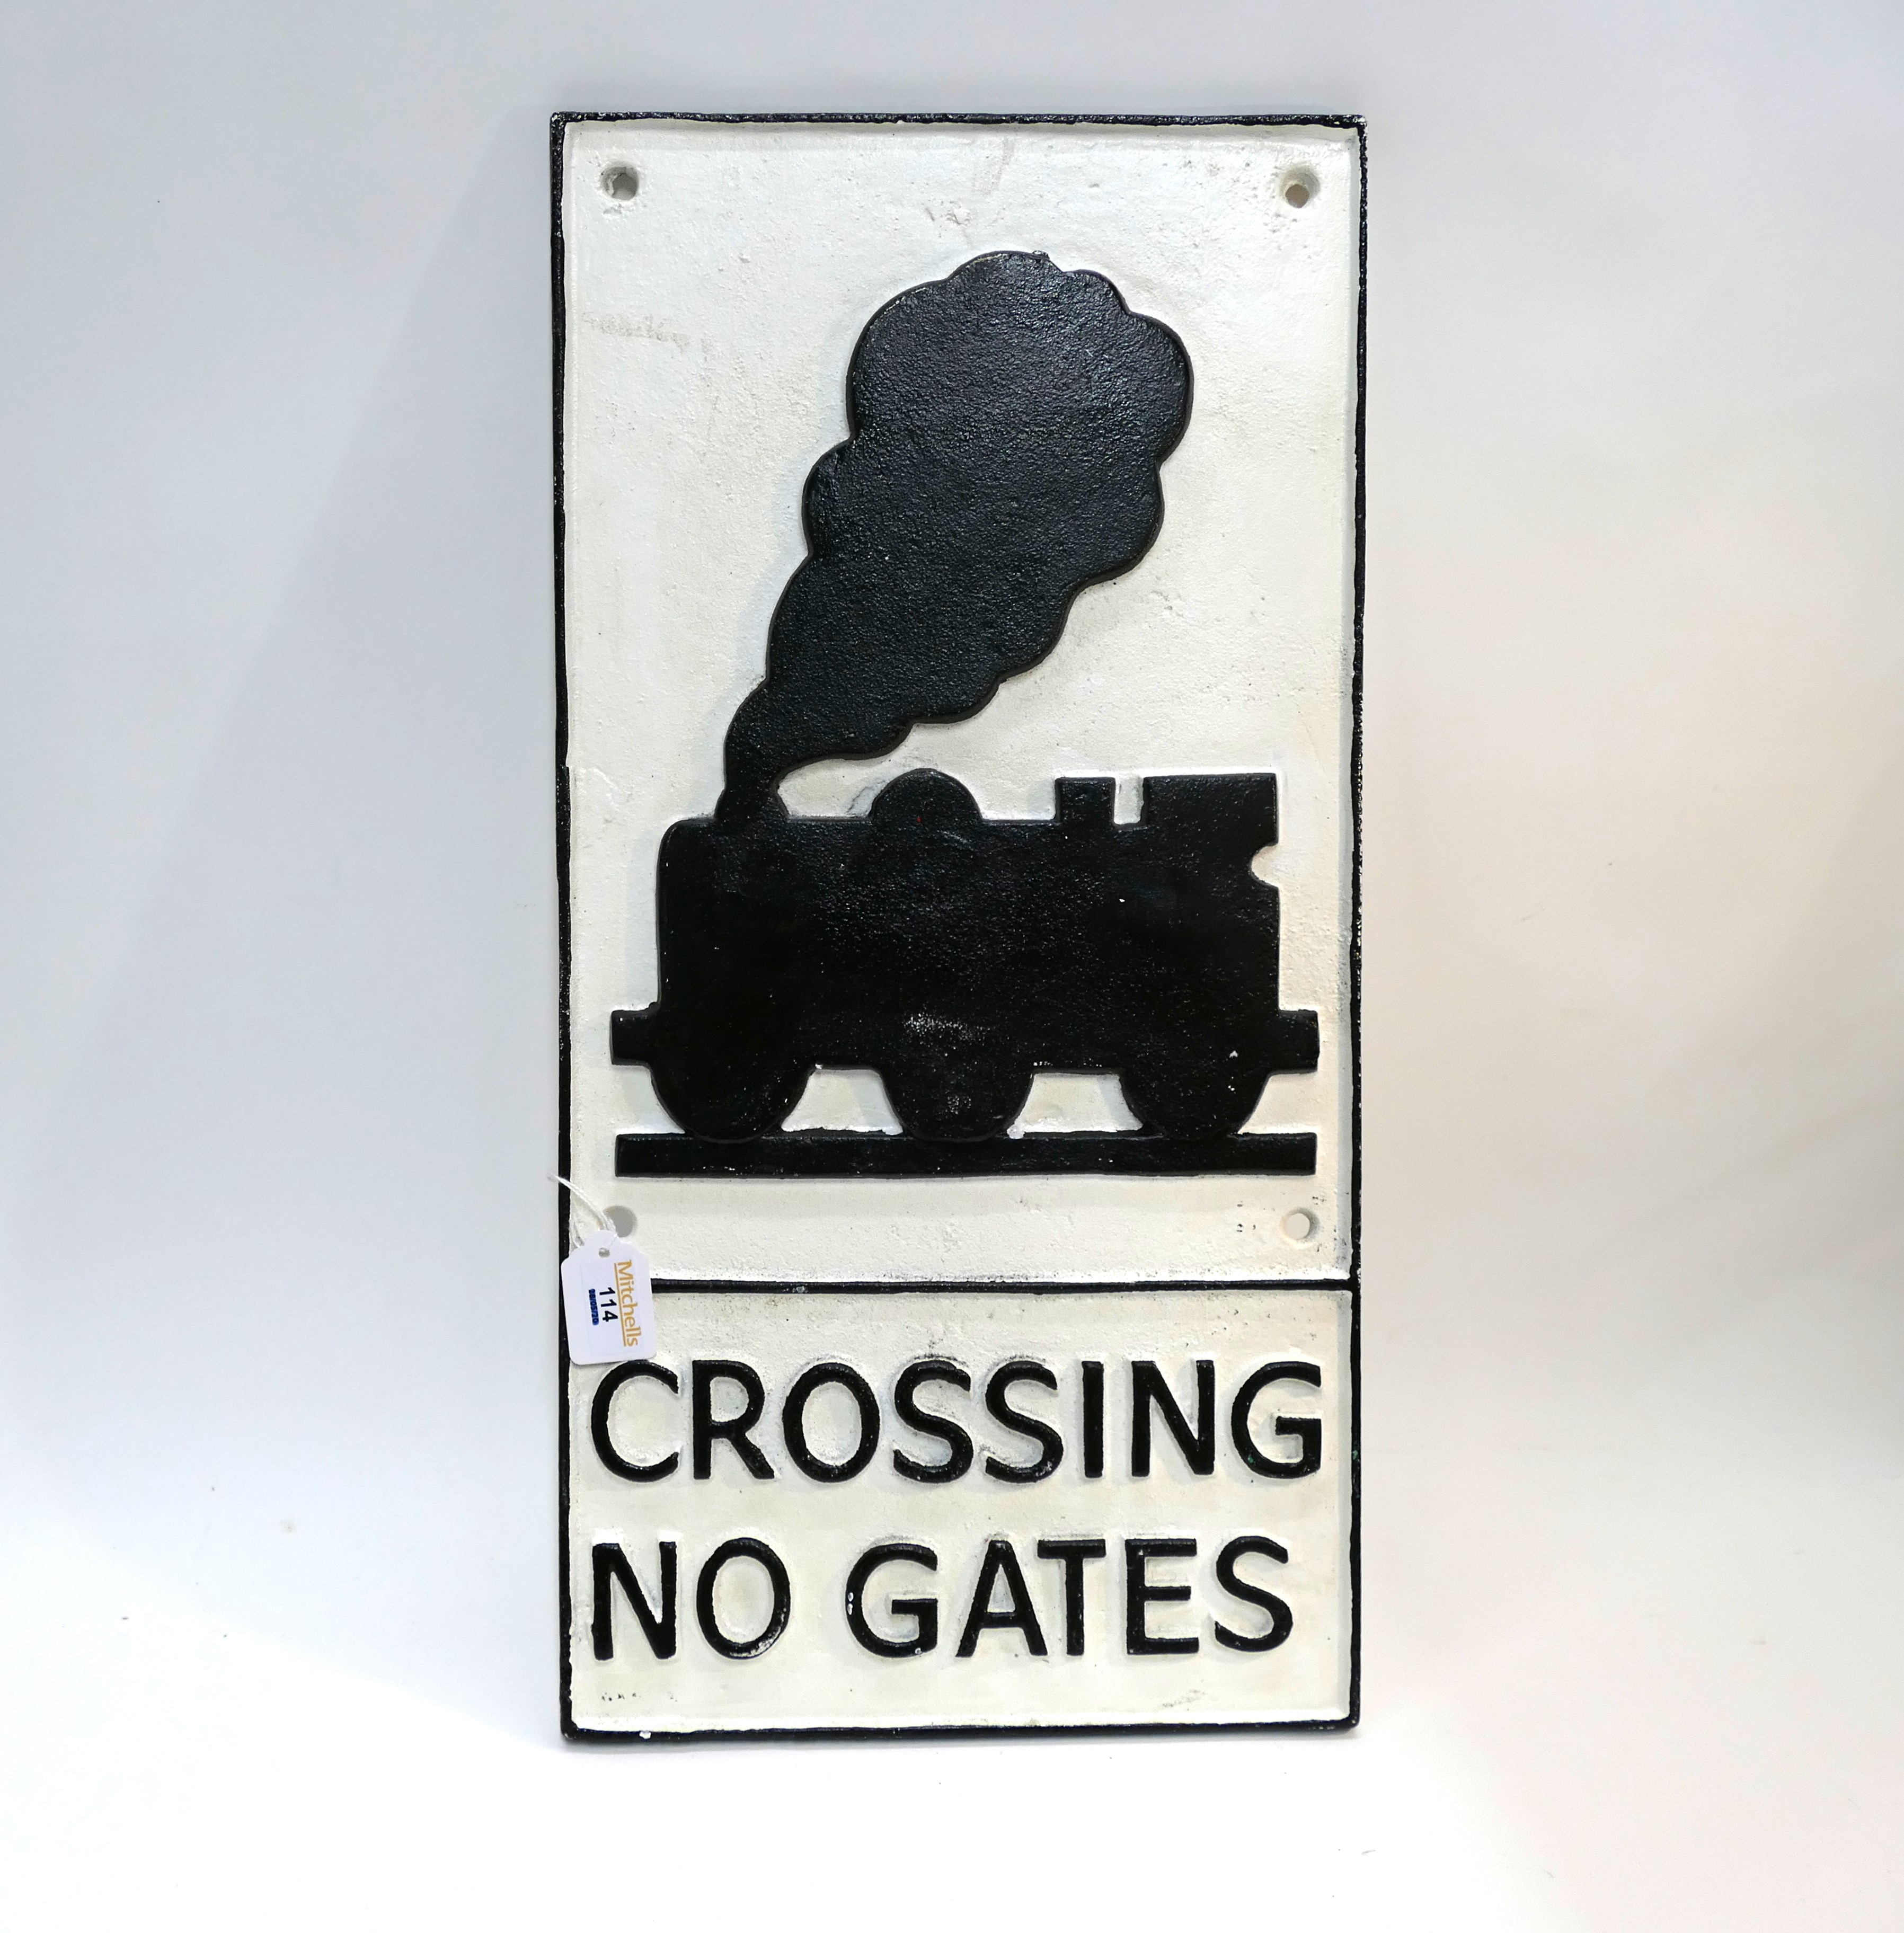 Reproduction cast metal railway sign, 'Crossing No Gates',